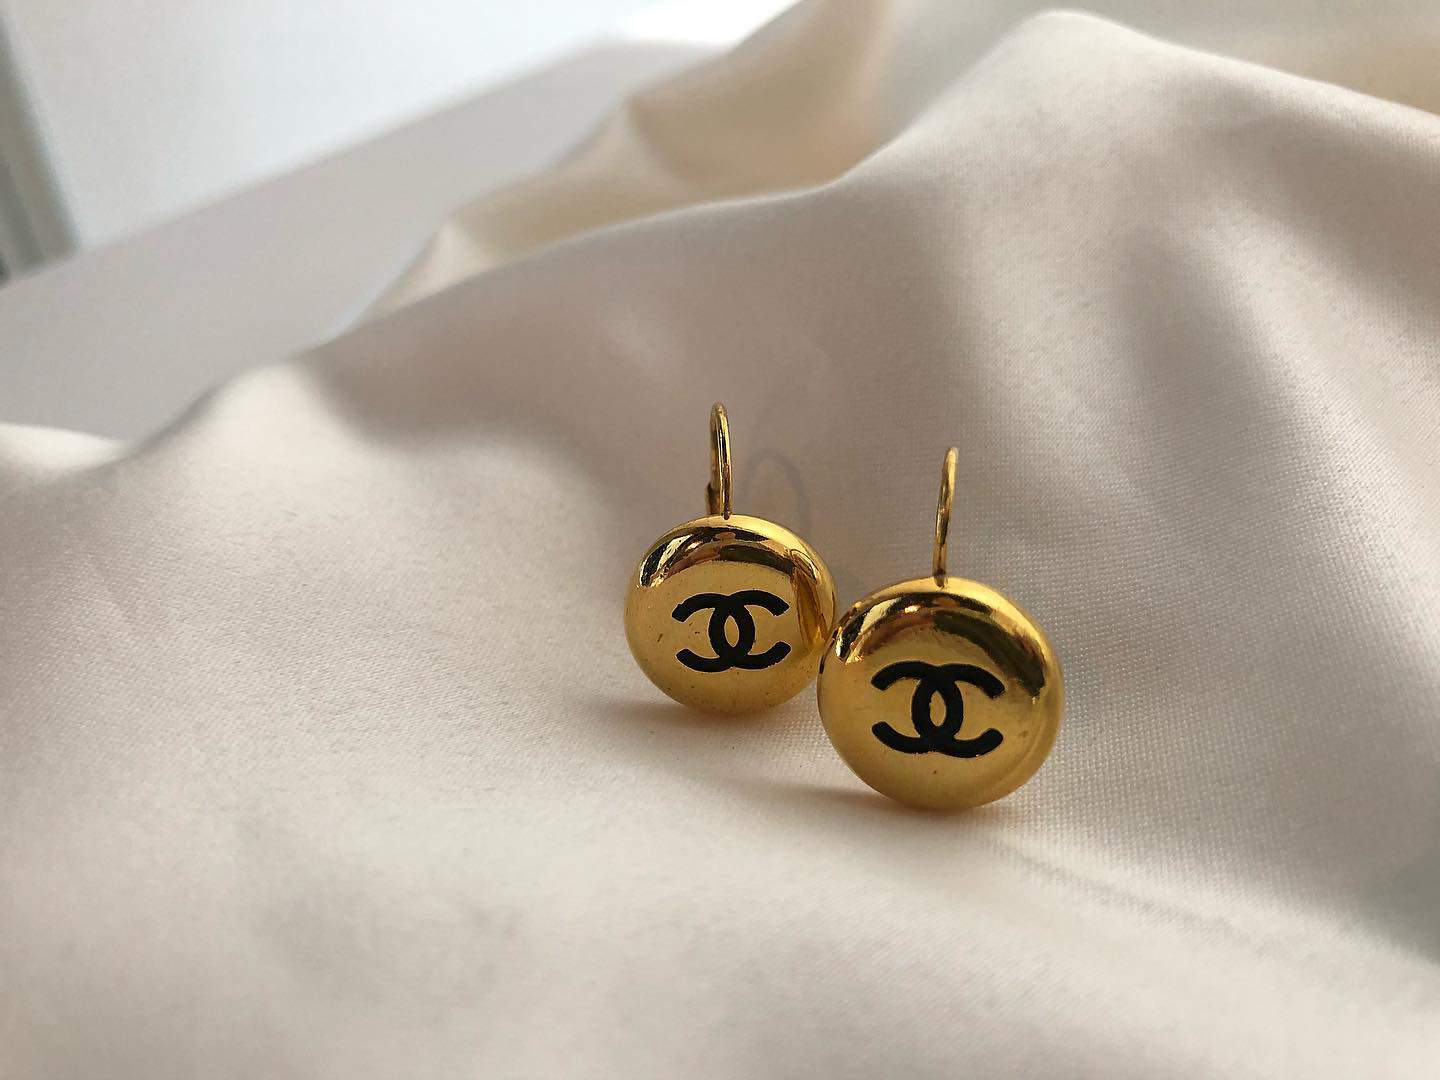 Chanel Earrings a Good Investment